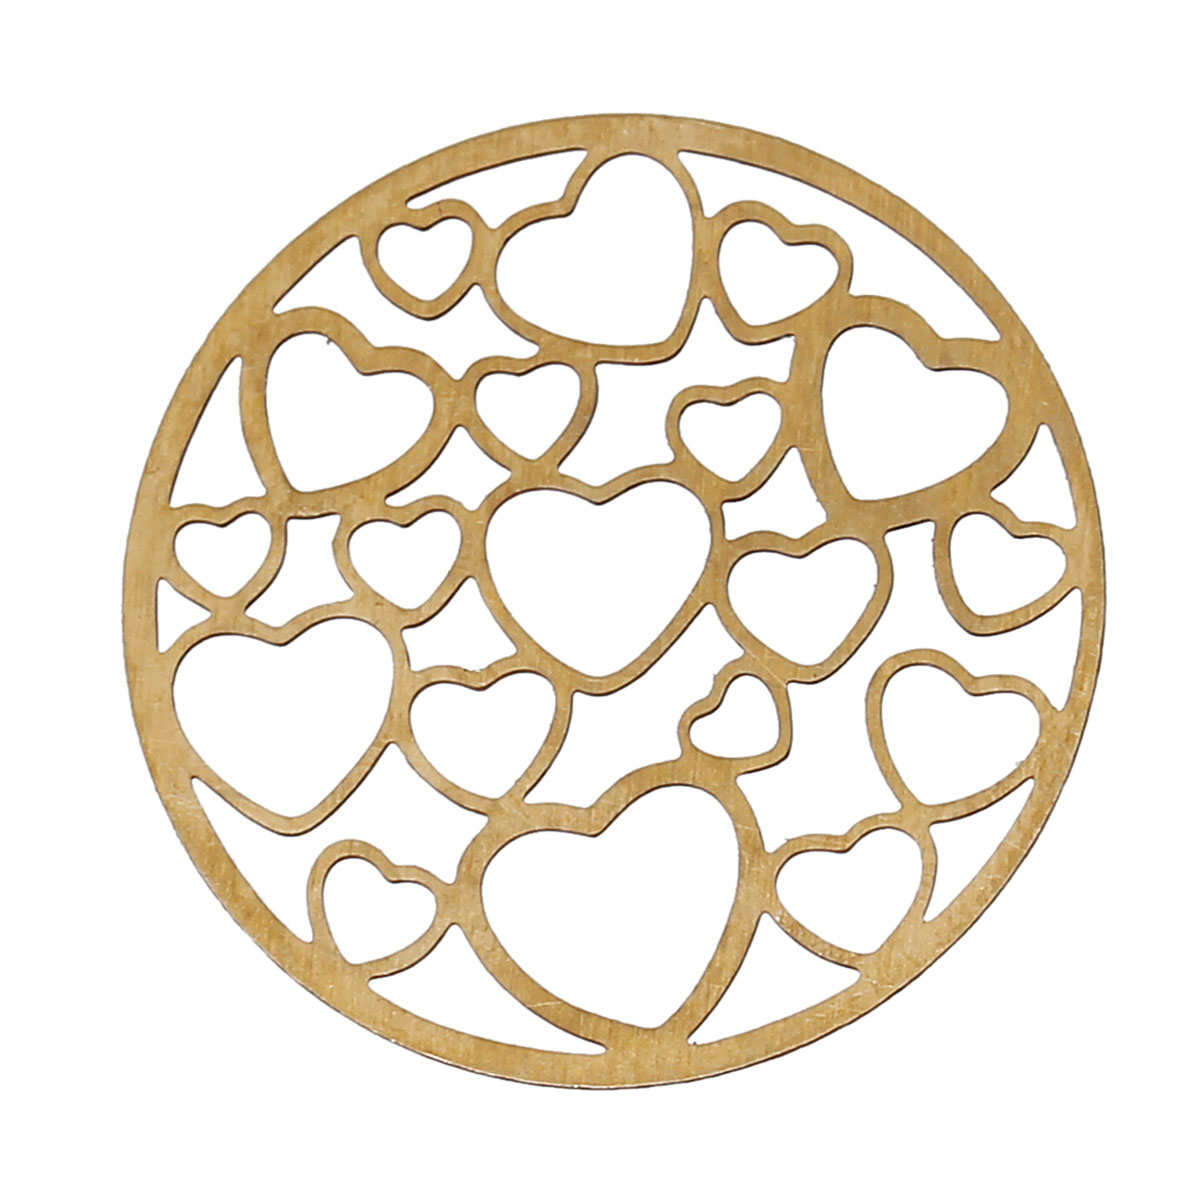 Image of Copper Embellishments Findings Round Brass Tone Hollow Heart Pattern 22.0mm( 7/8") Dia, 1 Piece 2015 new